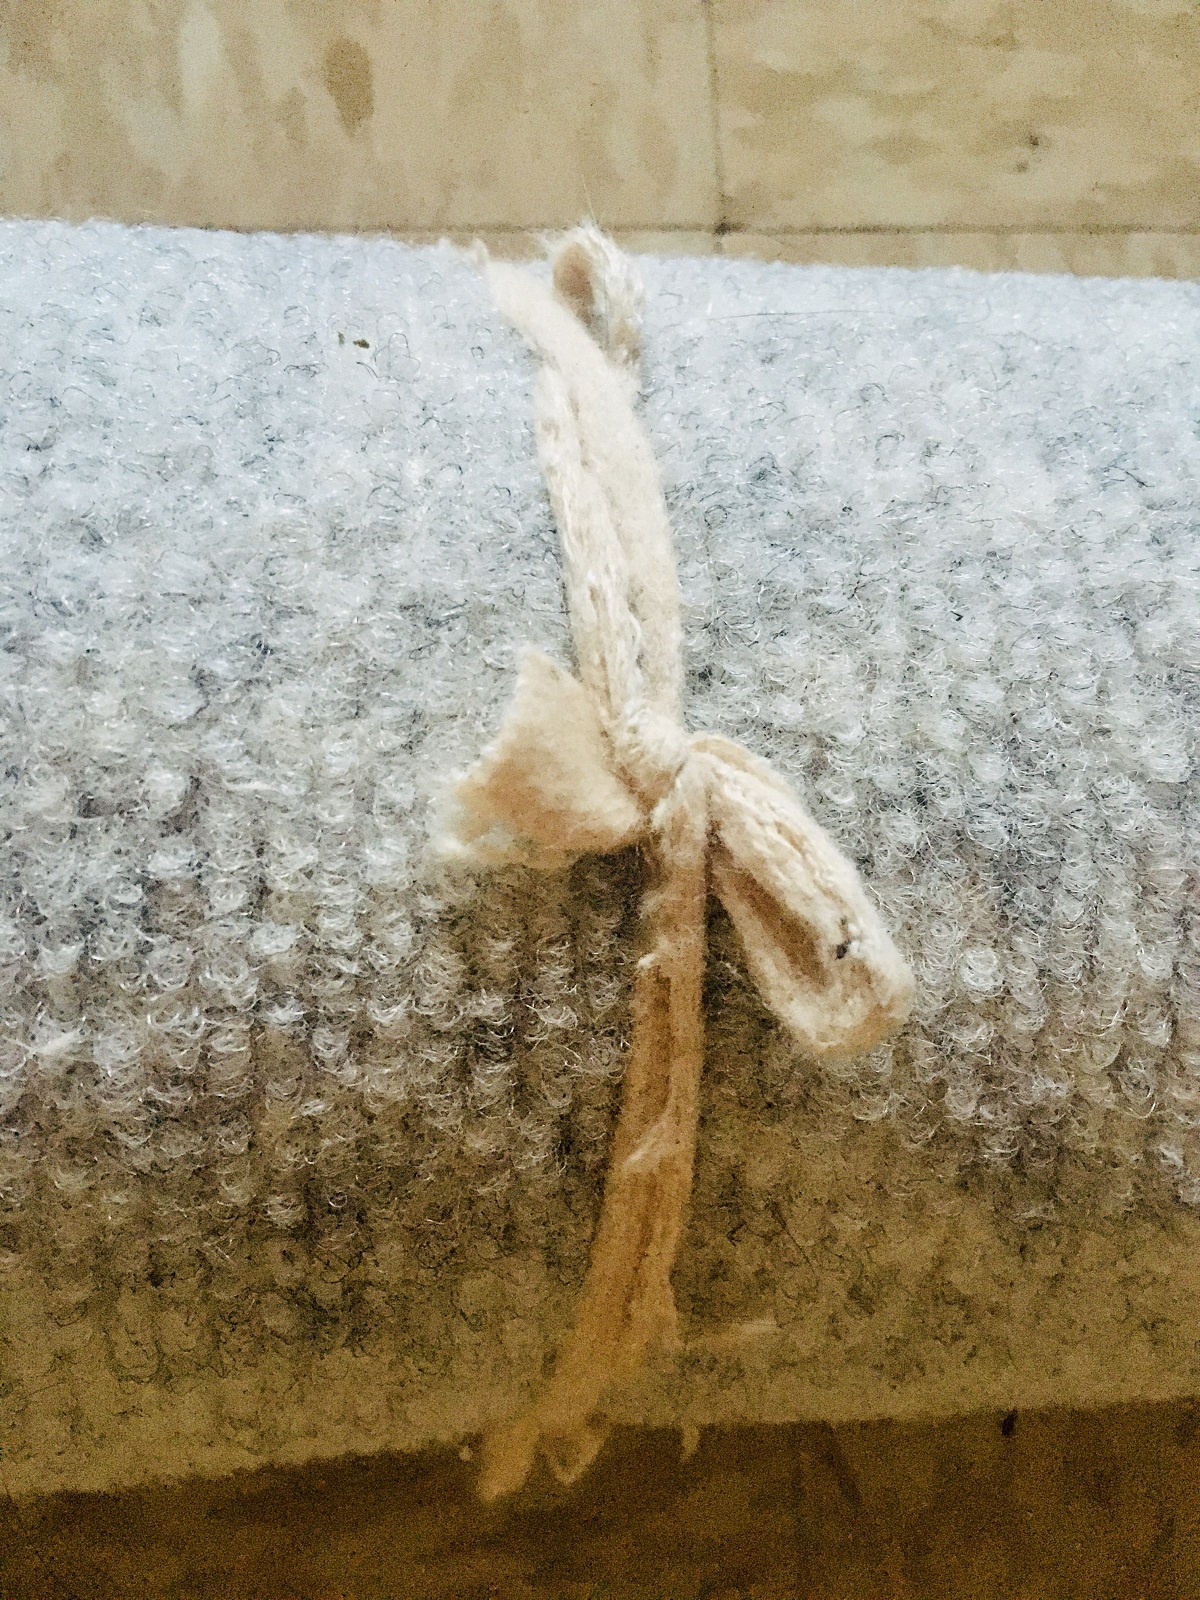 secure carpet on scratching post with string